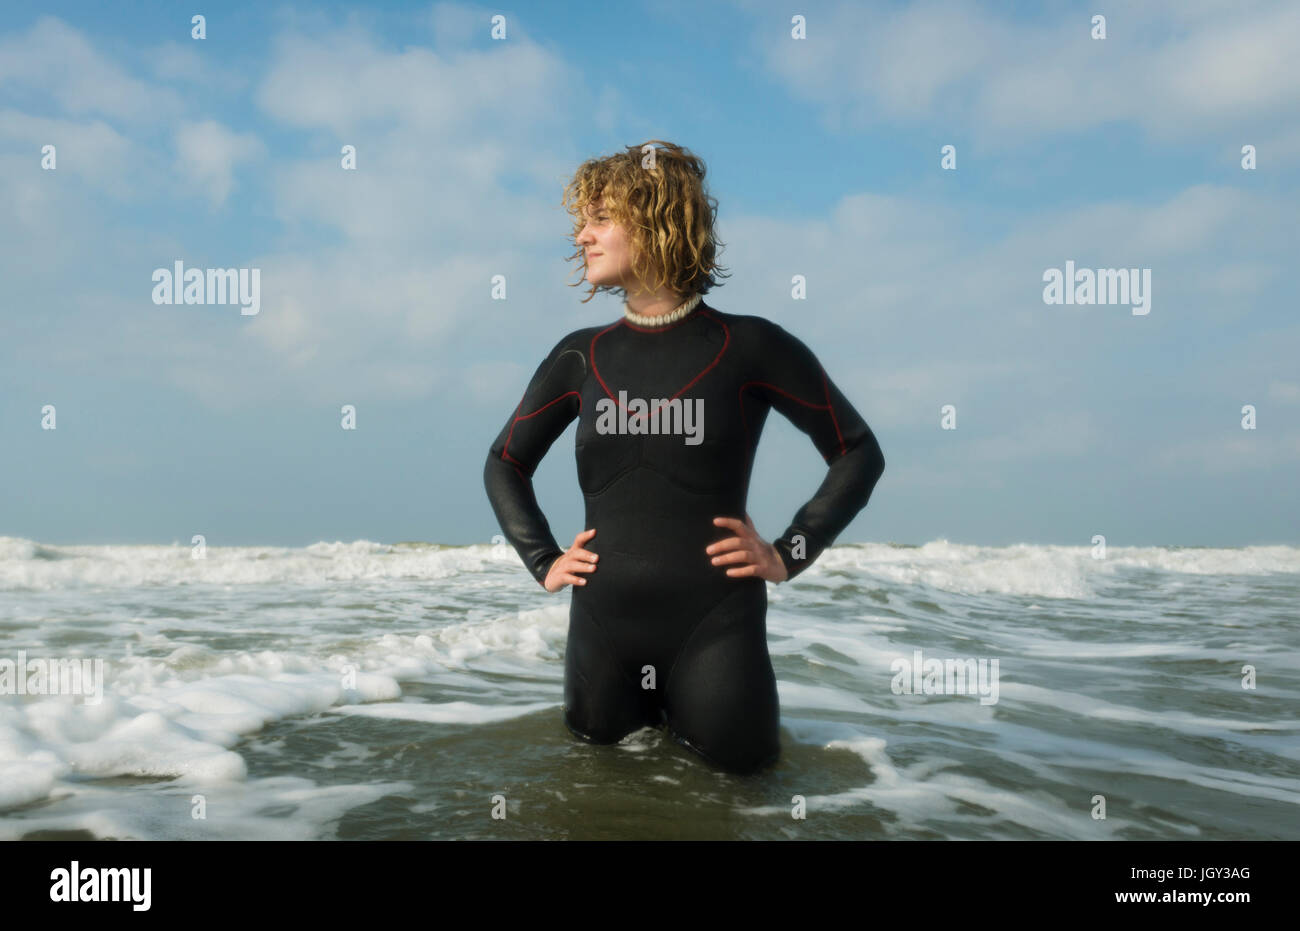 Girl standing in the North Sea wearing wetsuit Stock Photo